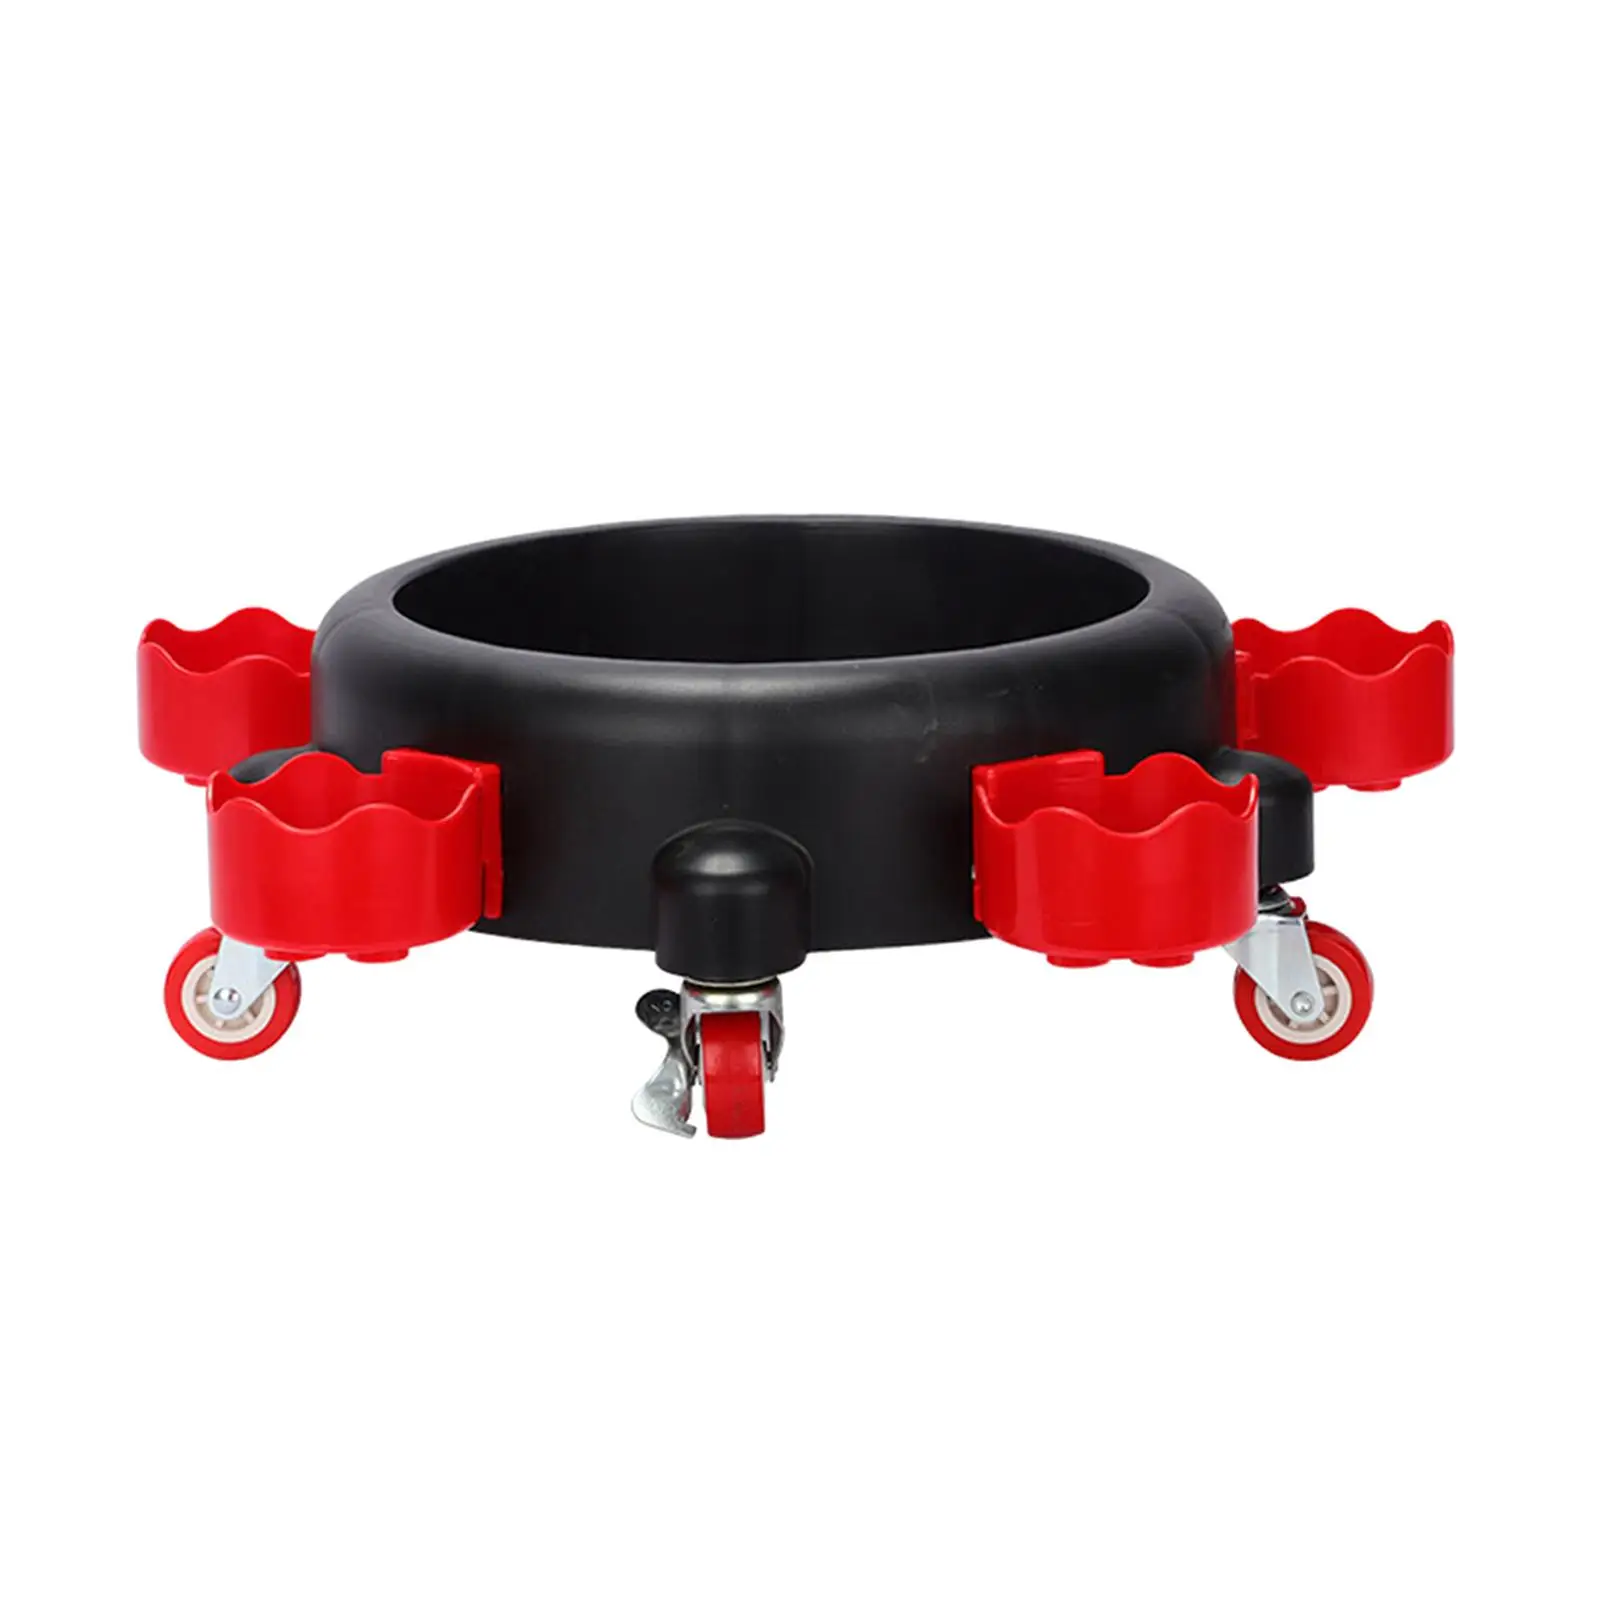 Bucket Dolly Withrolling Swivel Casters Moving Base Car Wash Stool for Painting Assistance Car Washing Car Beauty Cleaners